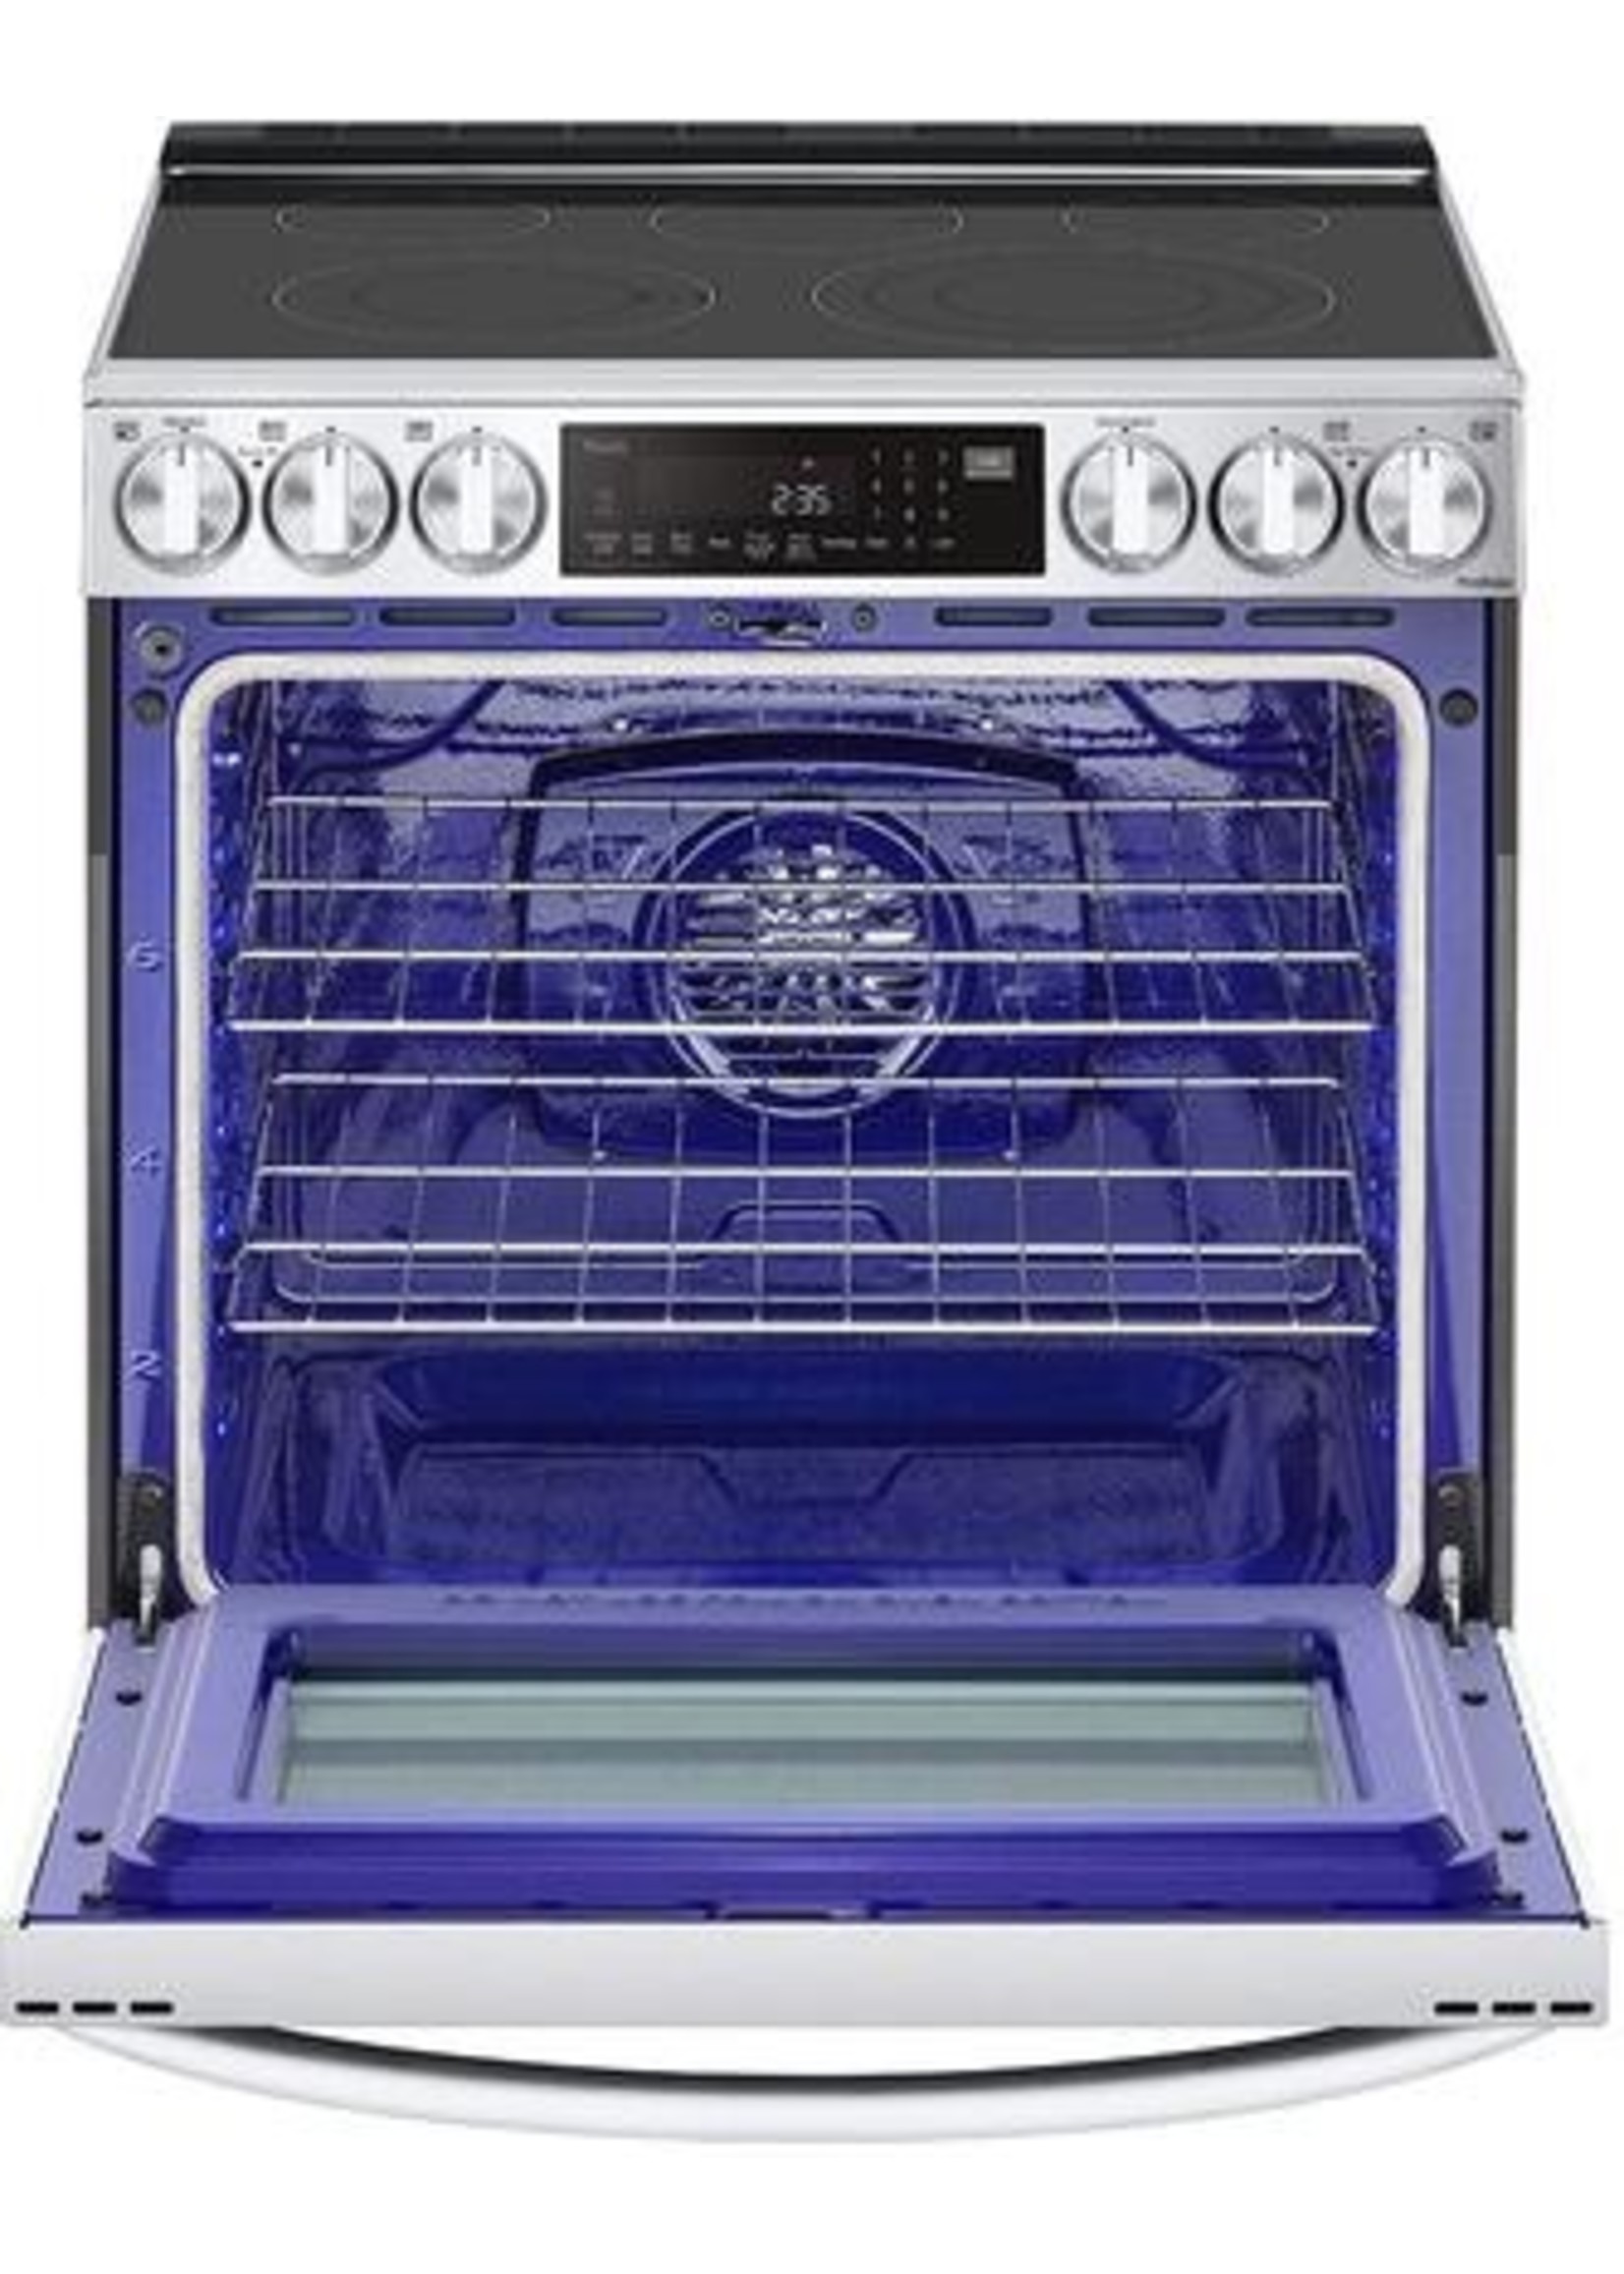 LG LG 6.3 cu. ft. Slide-in Electric Range with Easy Clean, Instaview and Air Fry in Printproof Stainless Stee